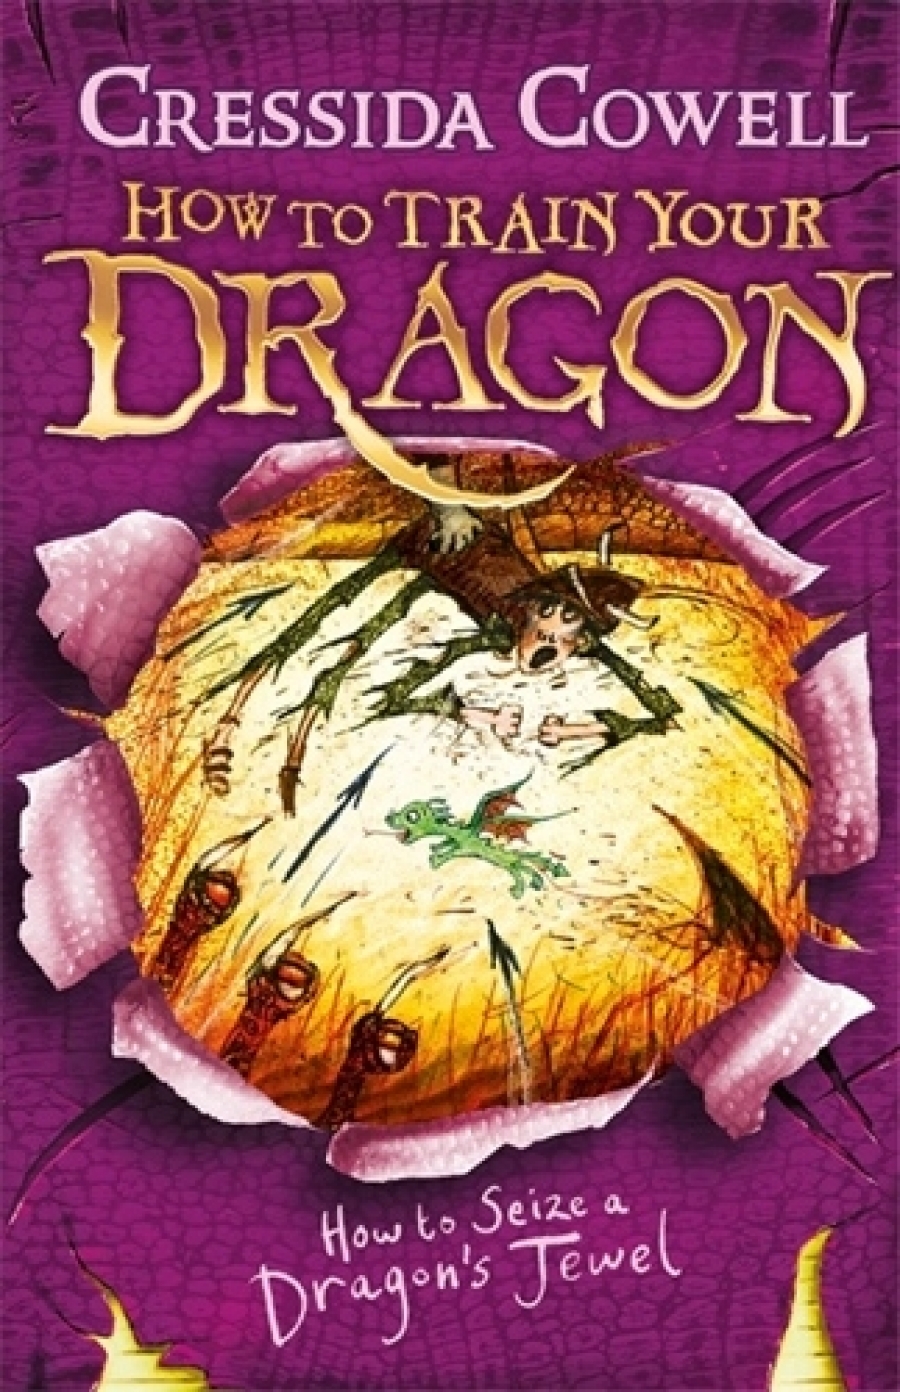 Cowell, Cressida How to Train Your Dragon: How to Seize a Dragon's Jewel 